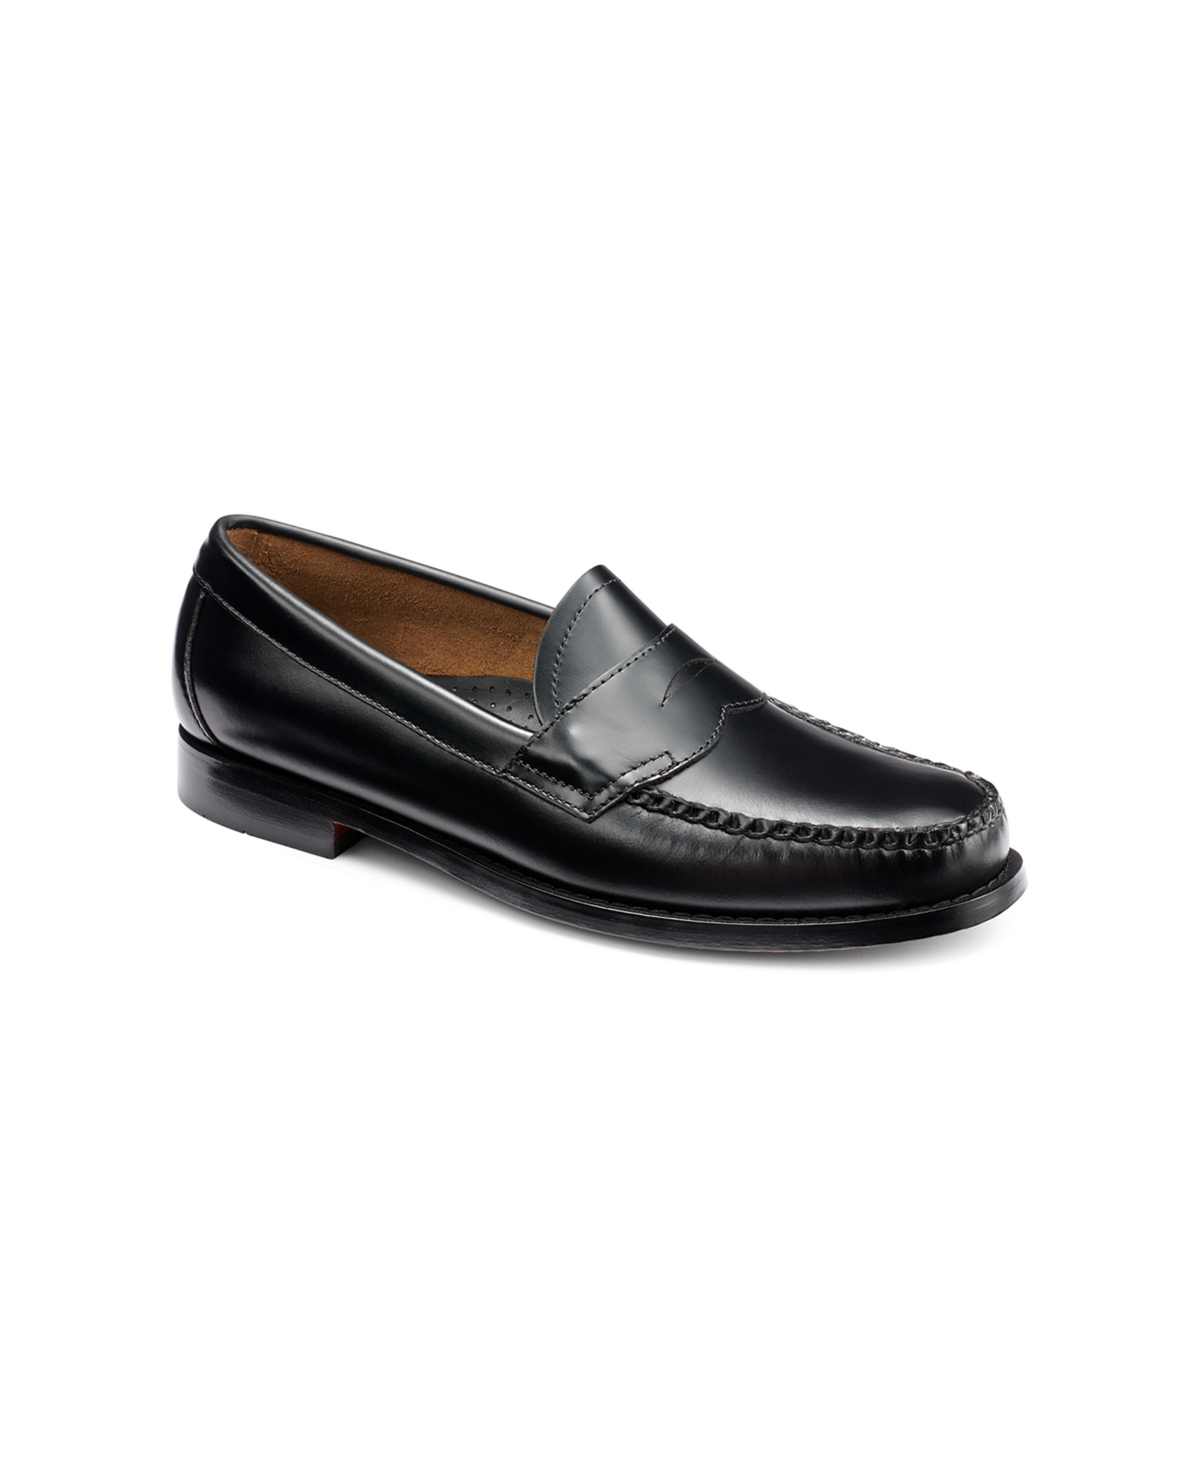 Gh Bass G.h.bass Men's 1936 Logan Flat Strap Weejuns Loafers In Black